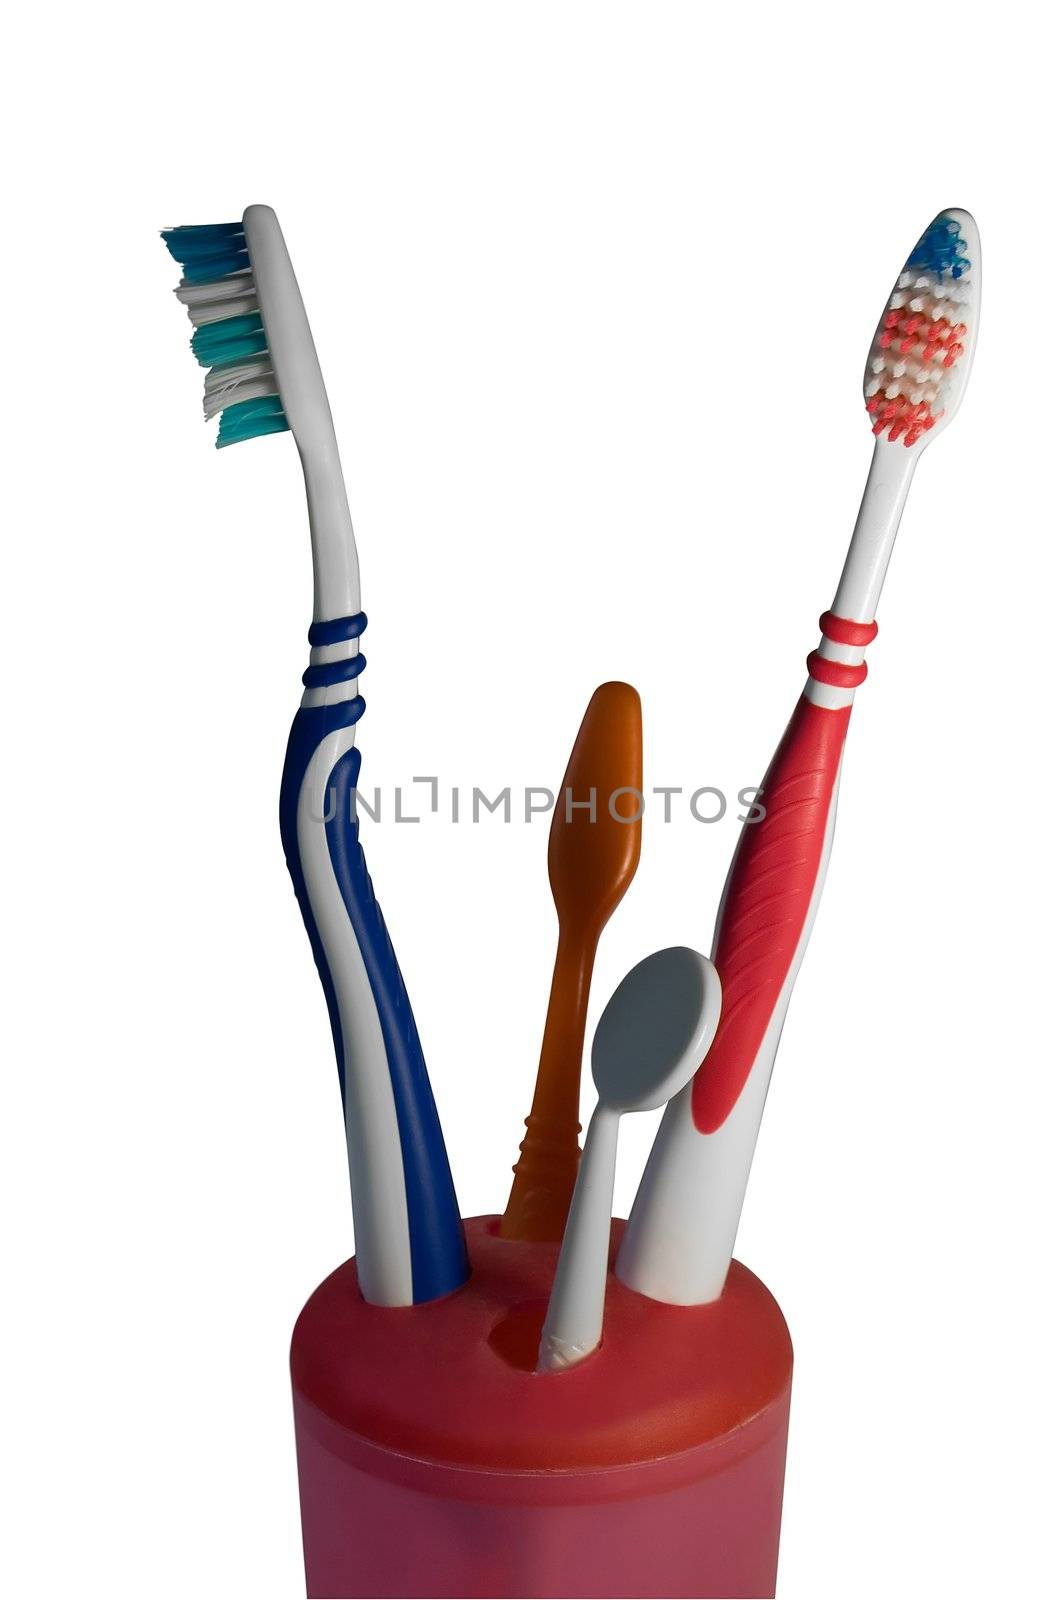 Toothbrushes on white